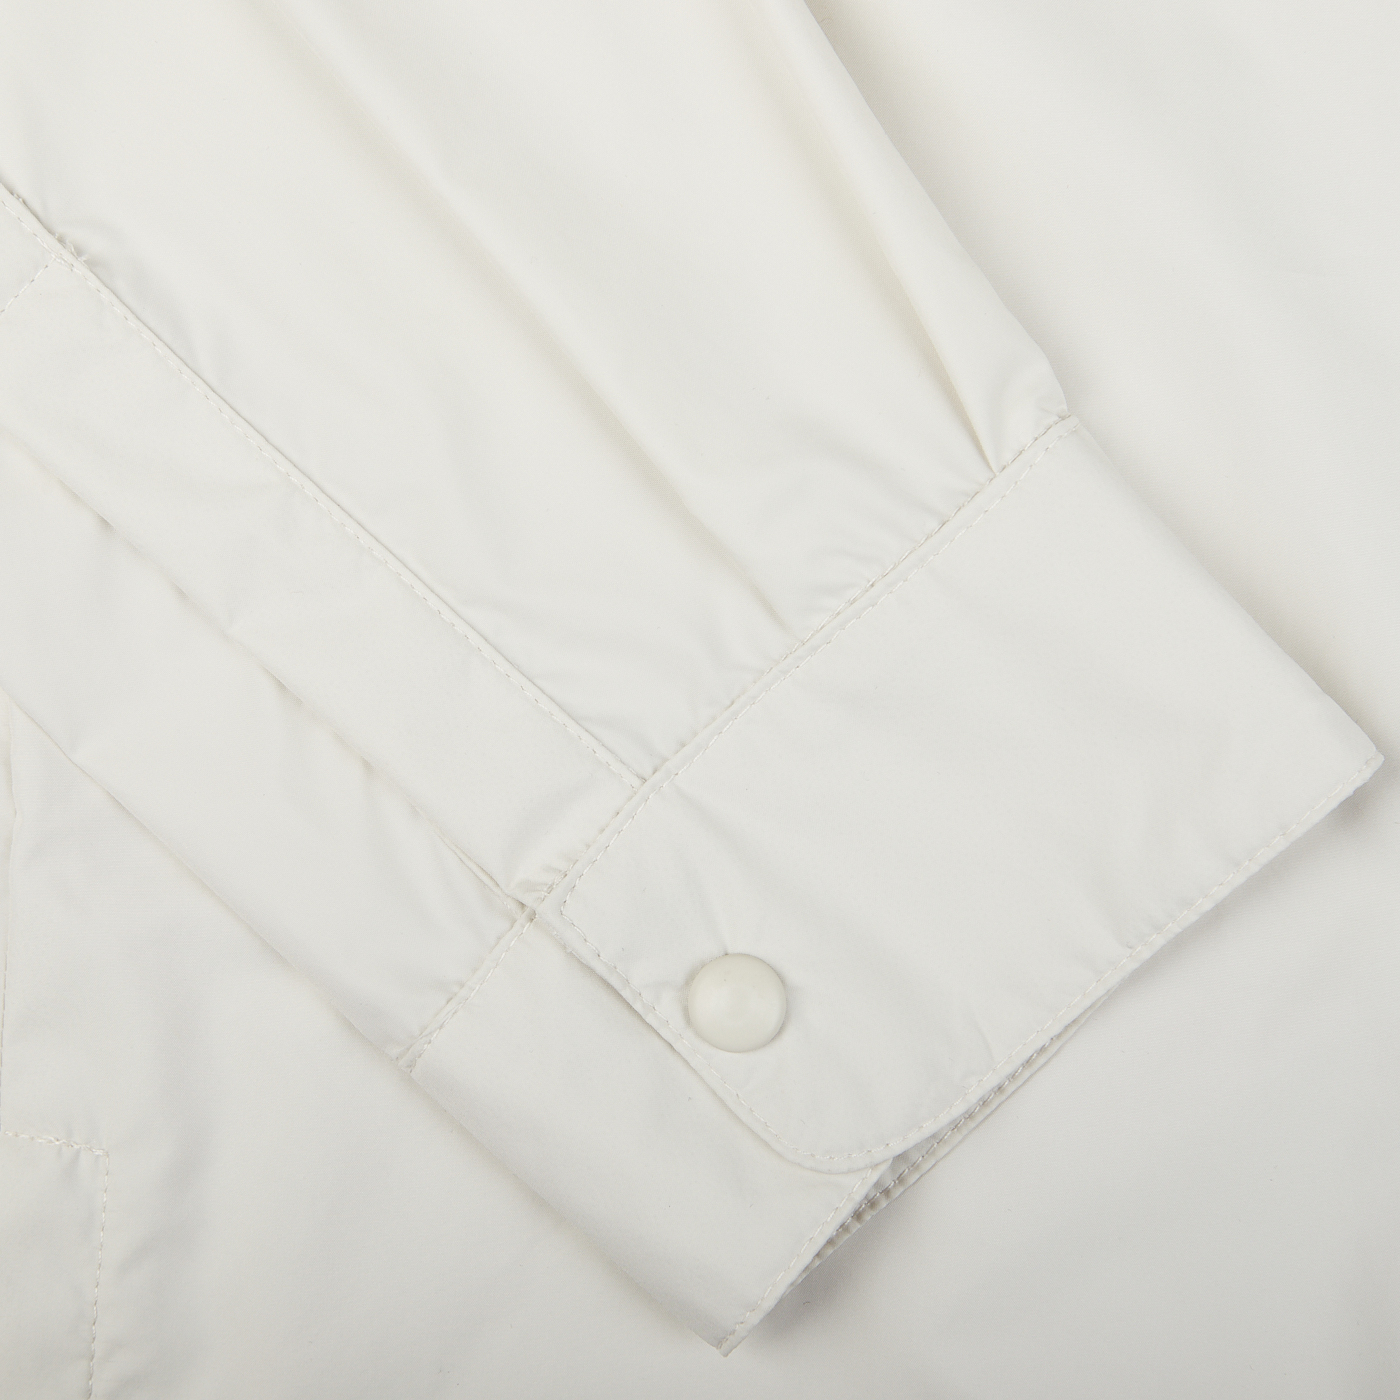 Close-up of a Mazzarelli Off-White Nylon Water Resistant Overshirt cuff with a button.